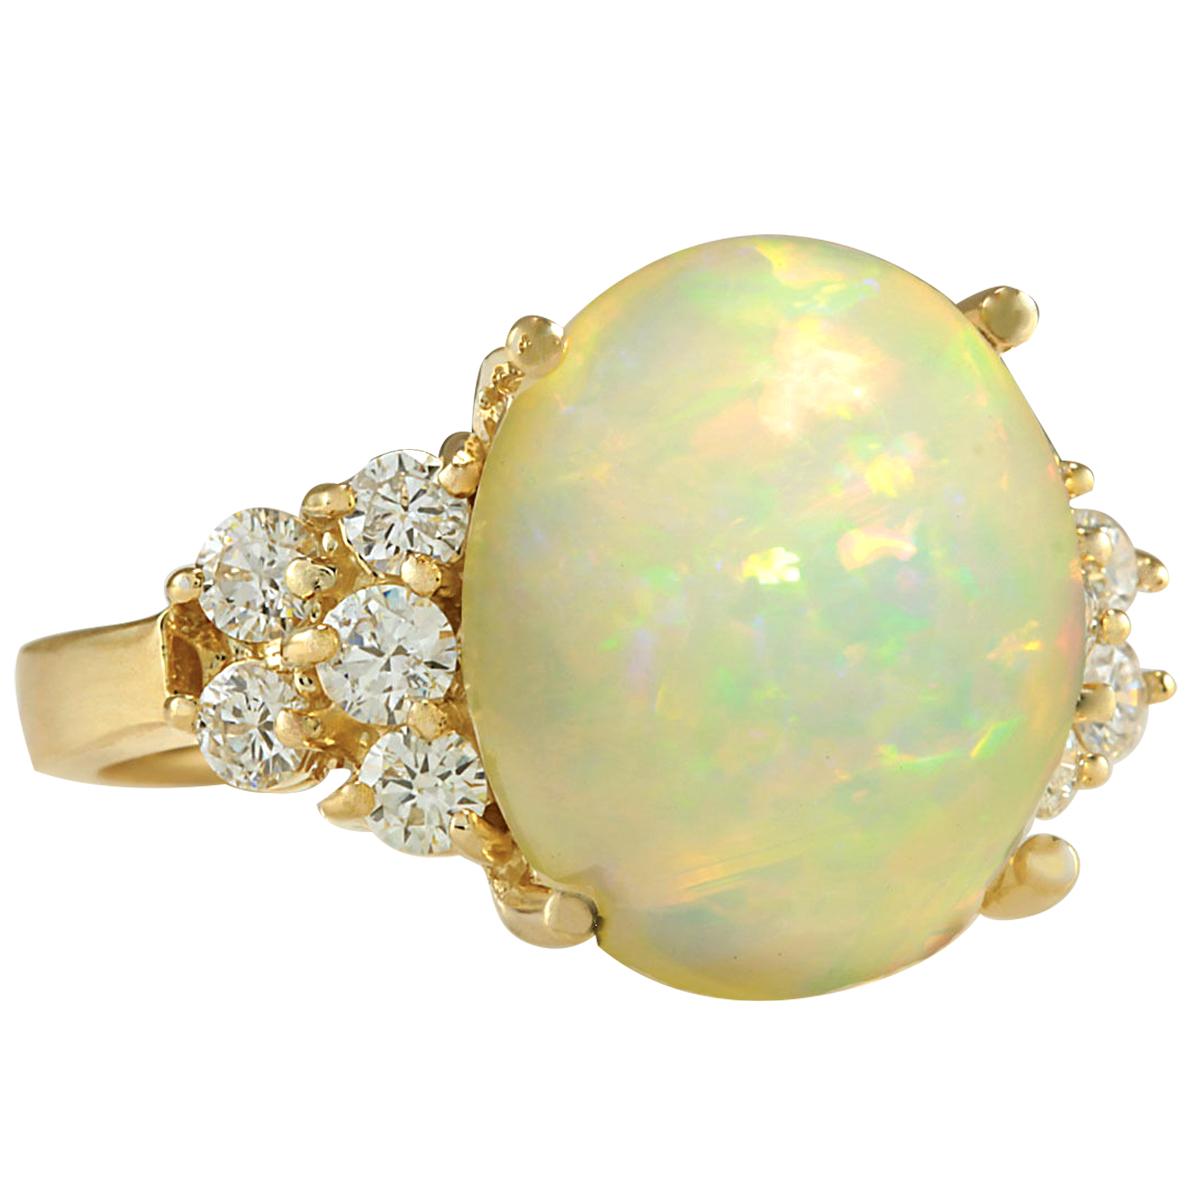 Stamped: 14K Yellow Gold
Total Ring Weight: 7.5 Grams
Total Natural Opal Weight is 6.07 Carat (Measures: 14.00x12.00 mm)
Color: Multicolor
Total Natural Diamond Weight is 0.60 Carat
Color: F-G, Clarity: VS2-SI1
Face Measures: 14.75x20.70 mm
Sku: